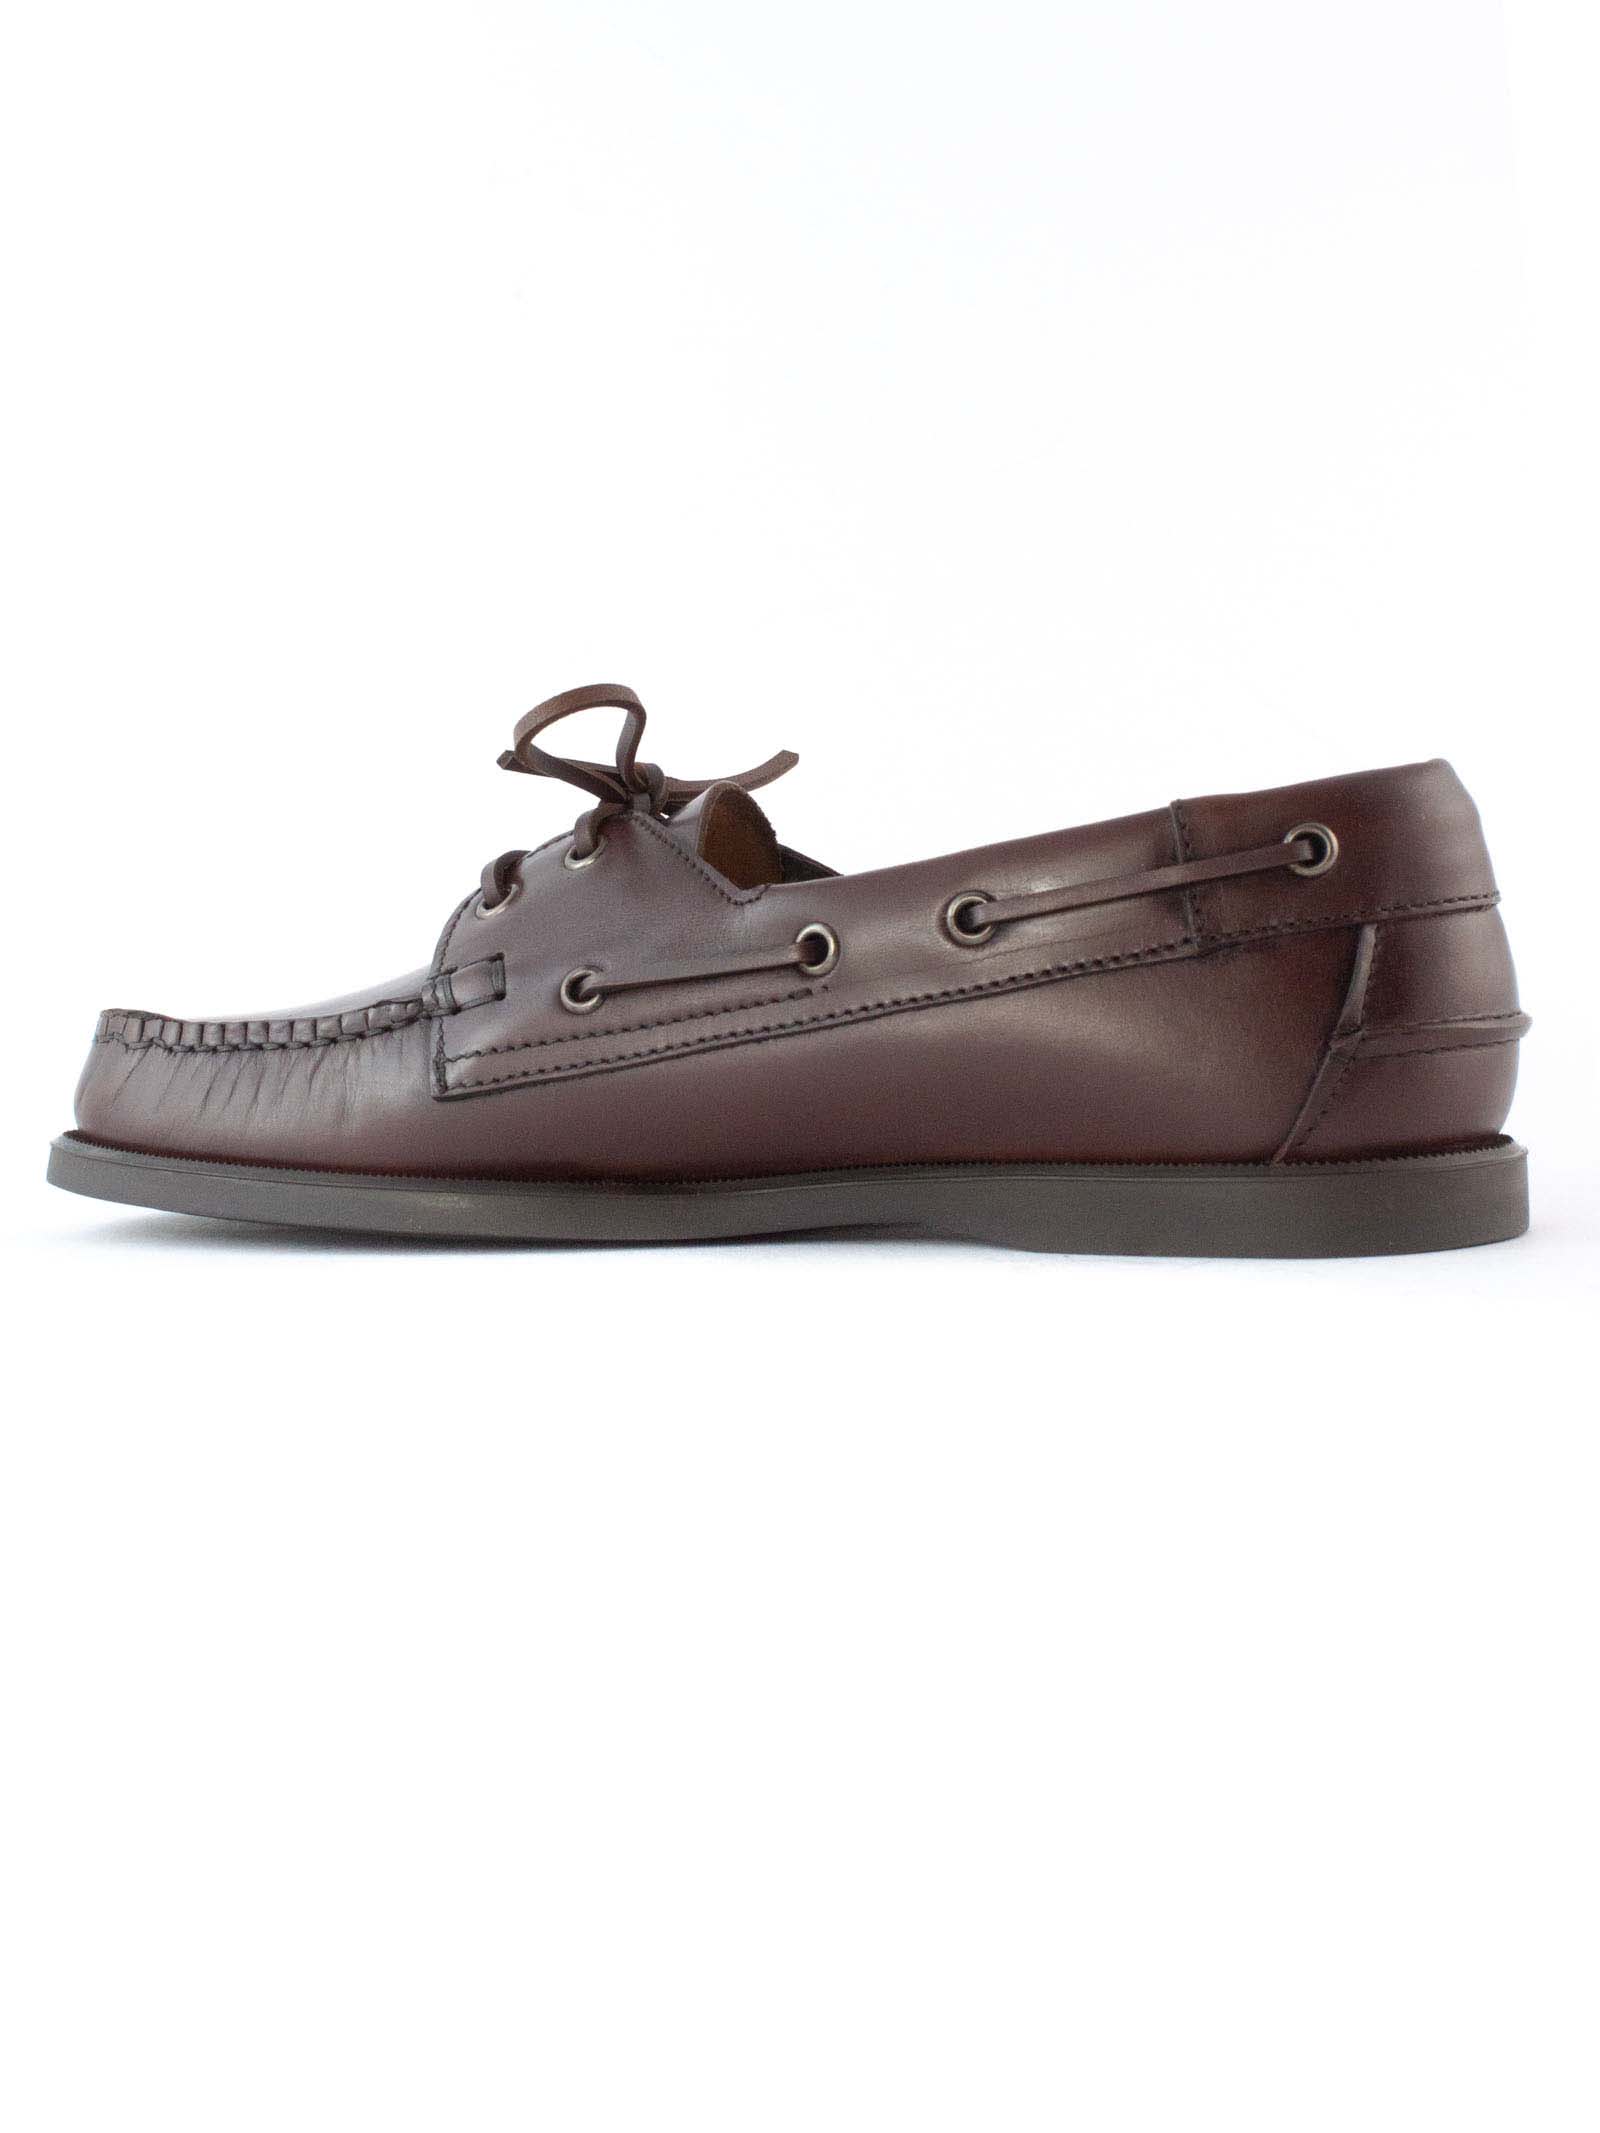 Shop Berwick 1707 Brown Leather Loafer